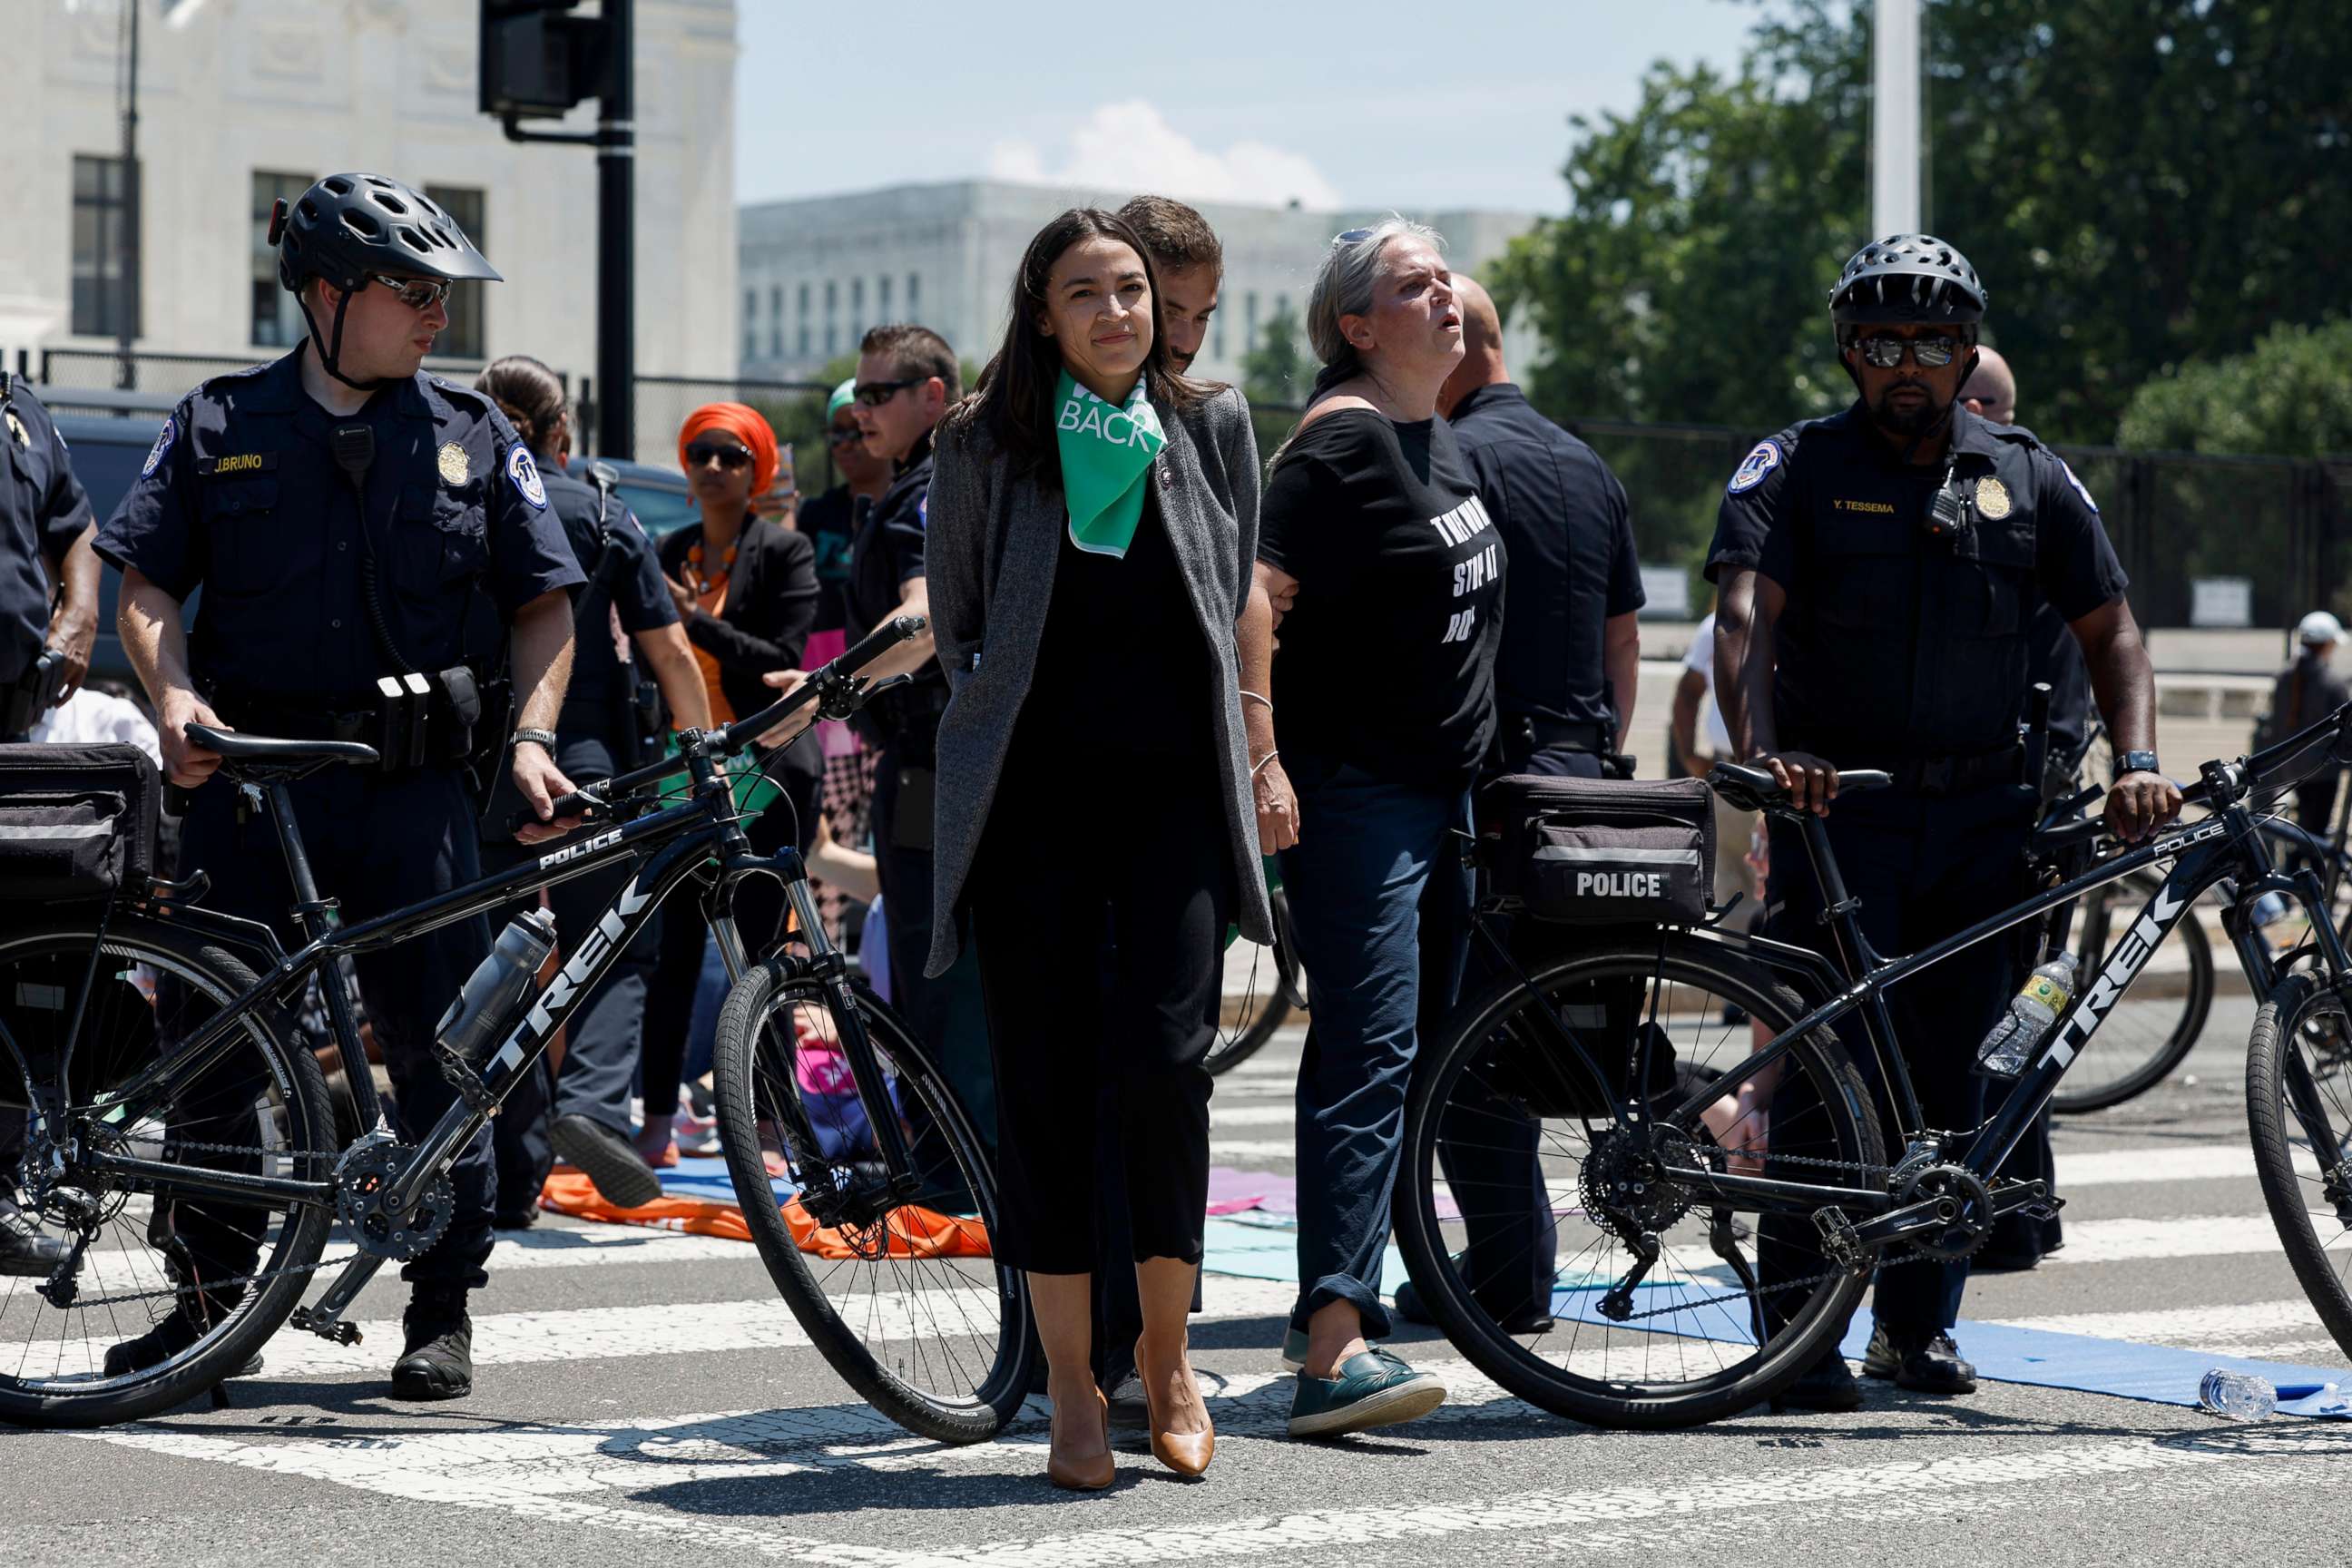 PHOTO: Rep. Alexandria Ocasio-Cortez is detained after participating in a sit in with activists from Center for Popular Democracy Action in front of the U.S. Supreme Court Building on July 19, 2022 in Washington, DC.